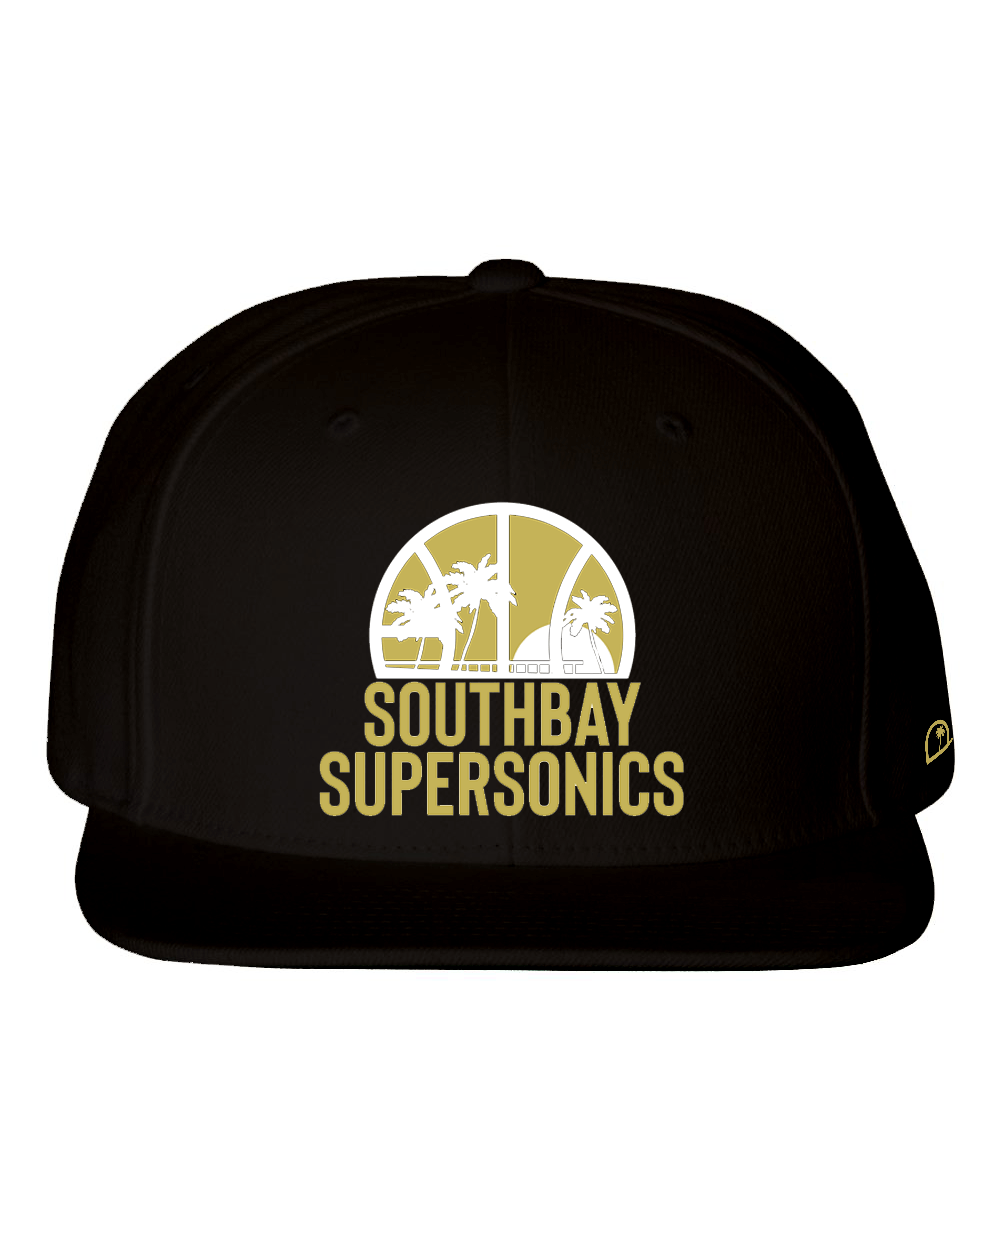 SOUTHBAY SUPERSONICS